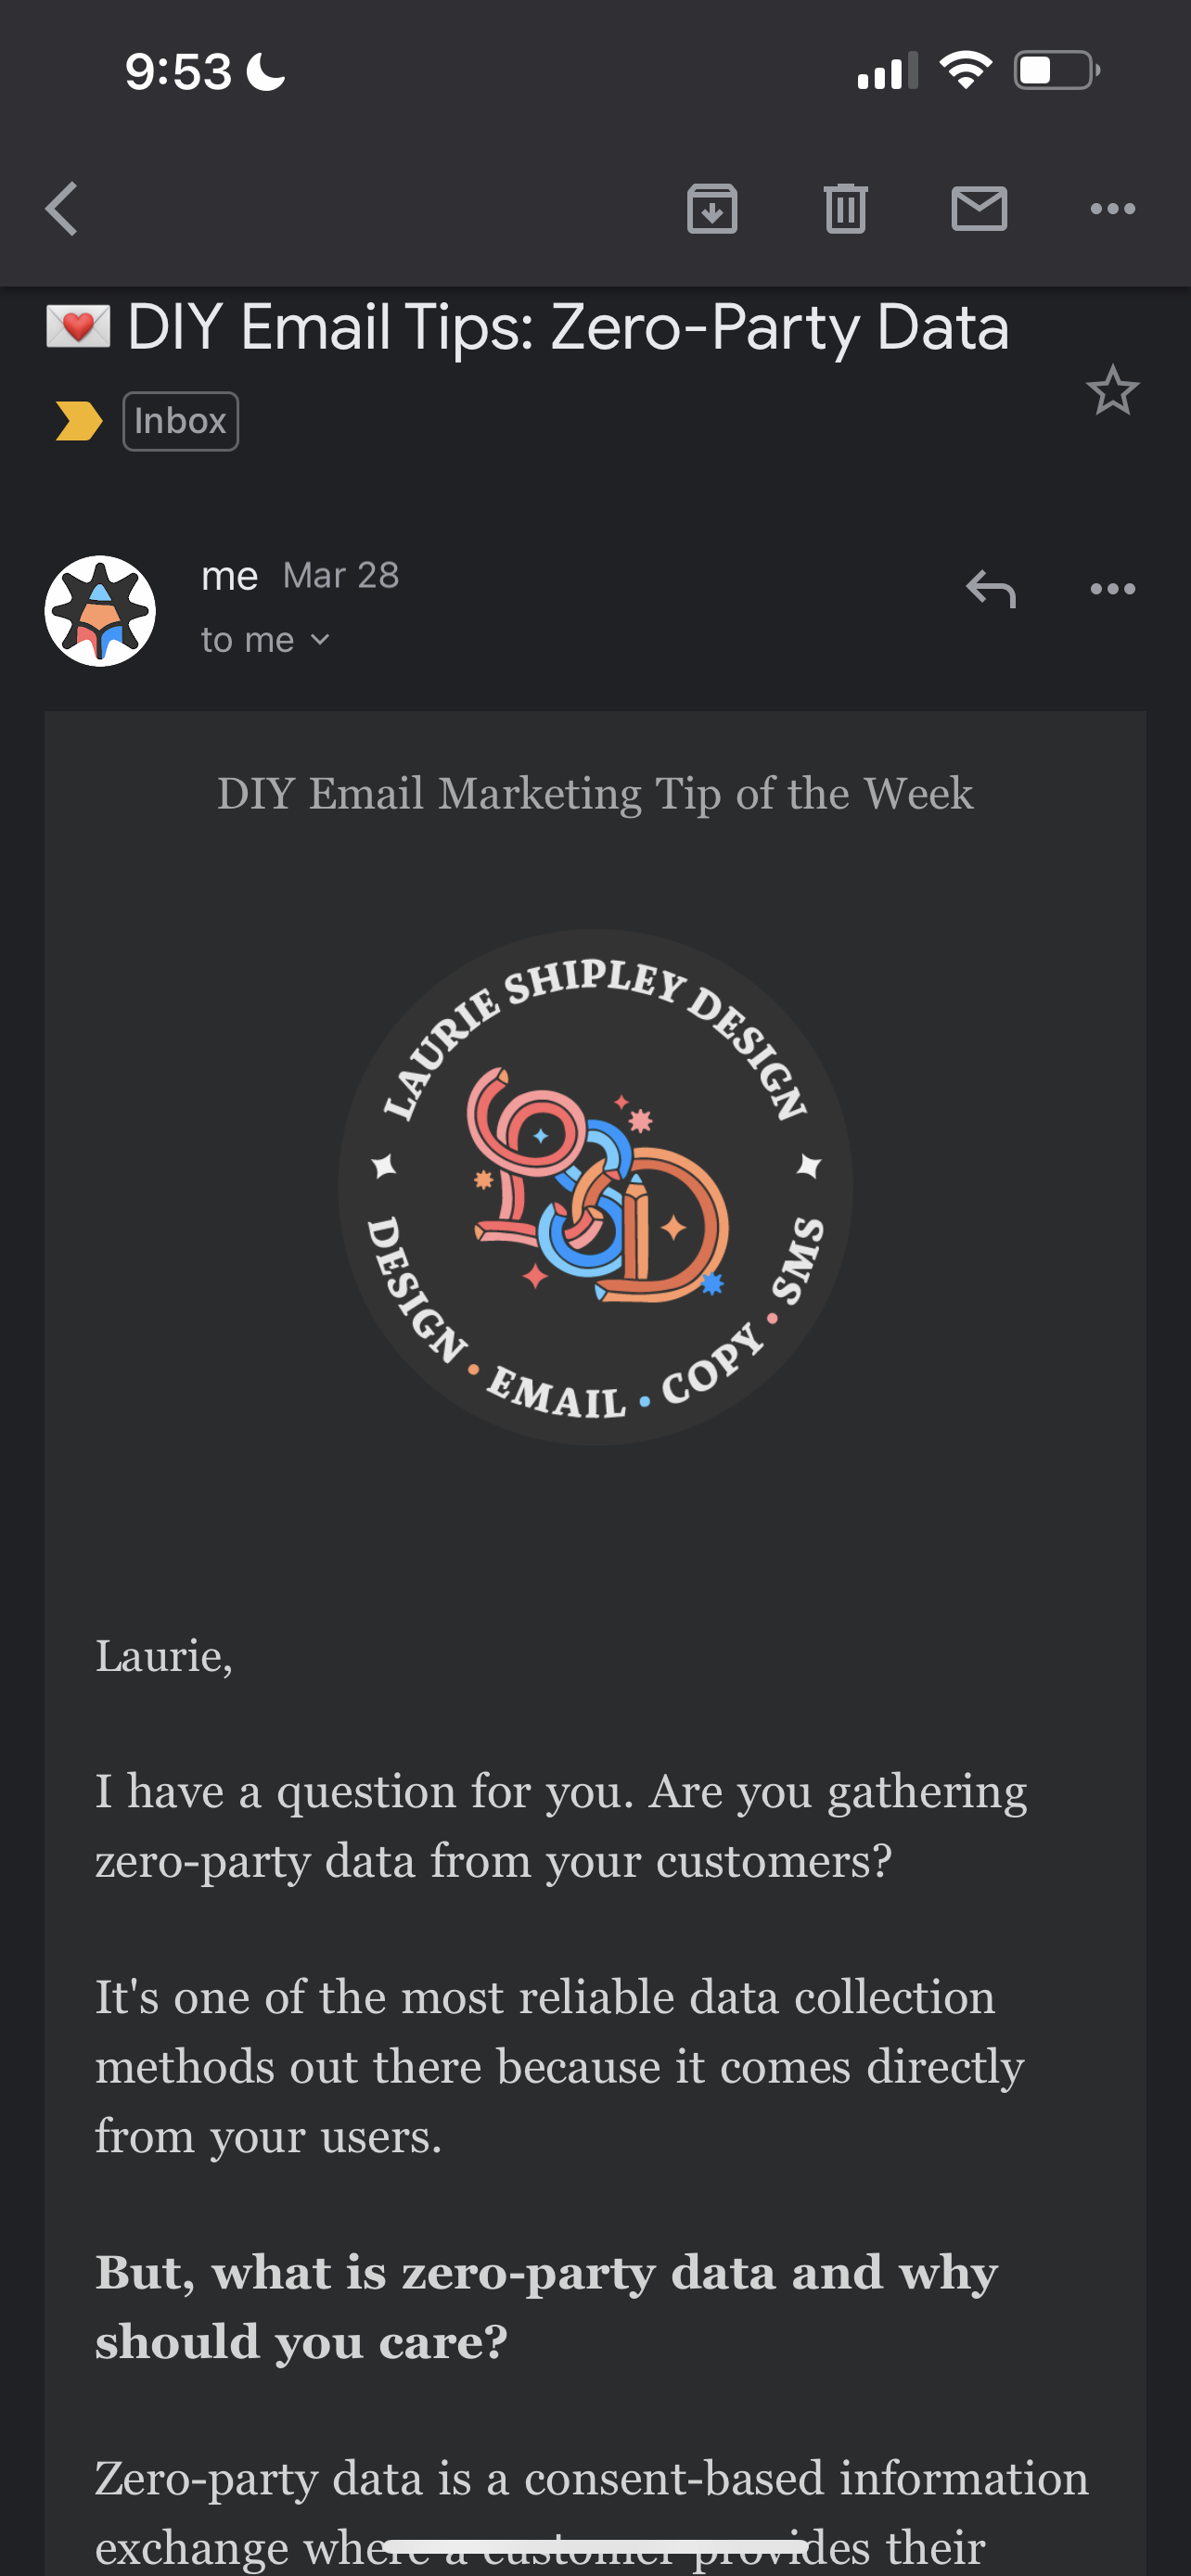 Laurie-Shipley-Design-DarkMode-1.png